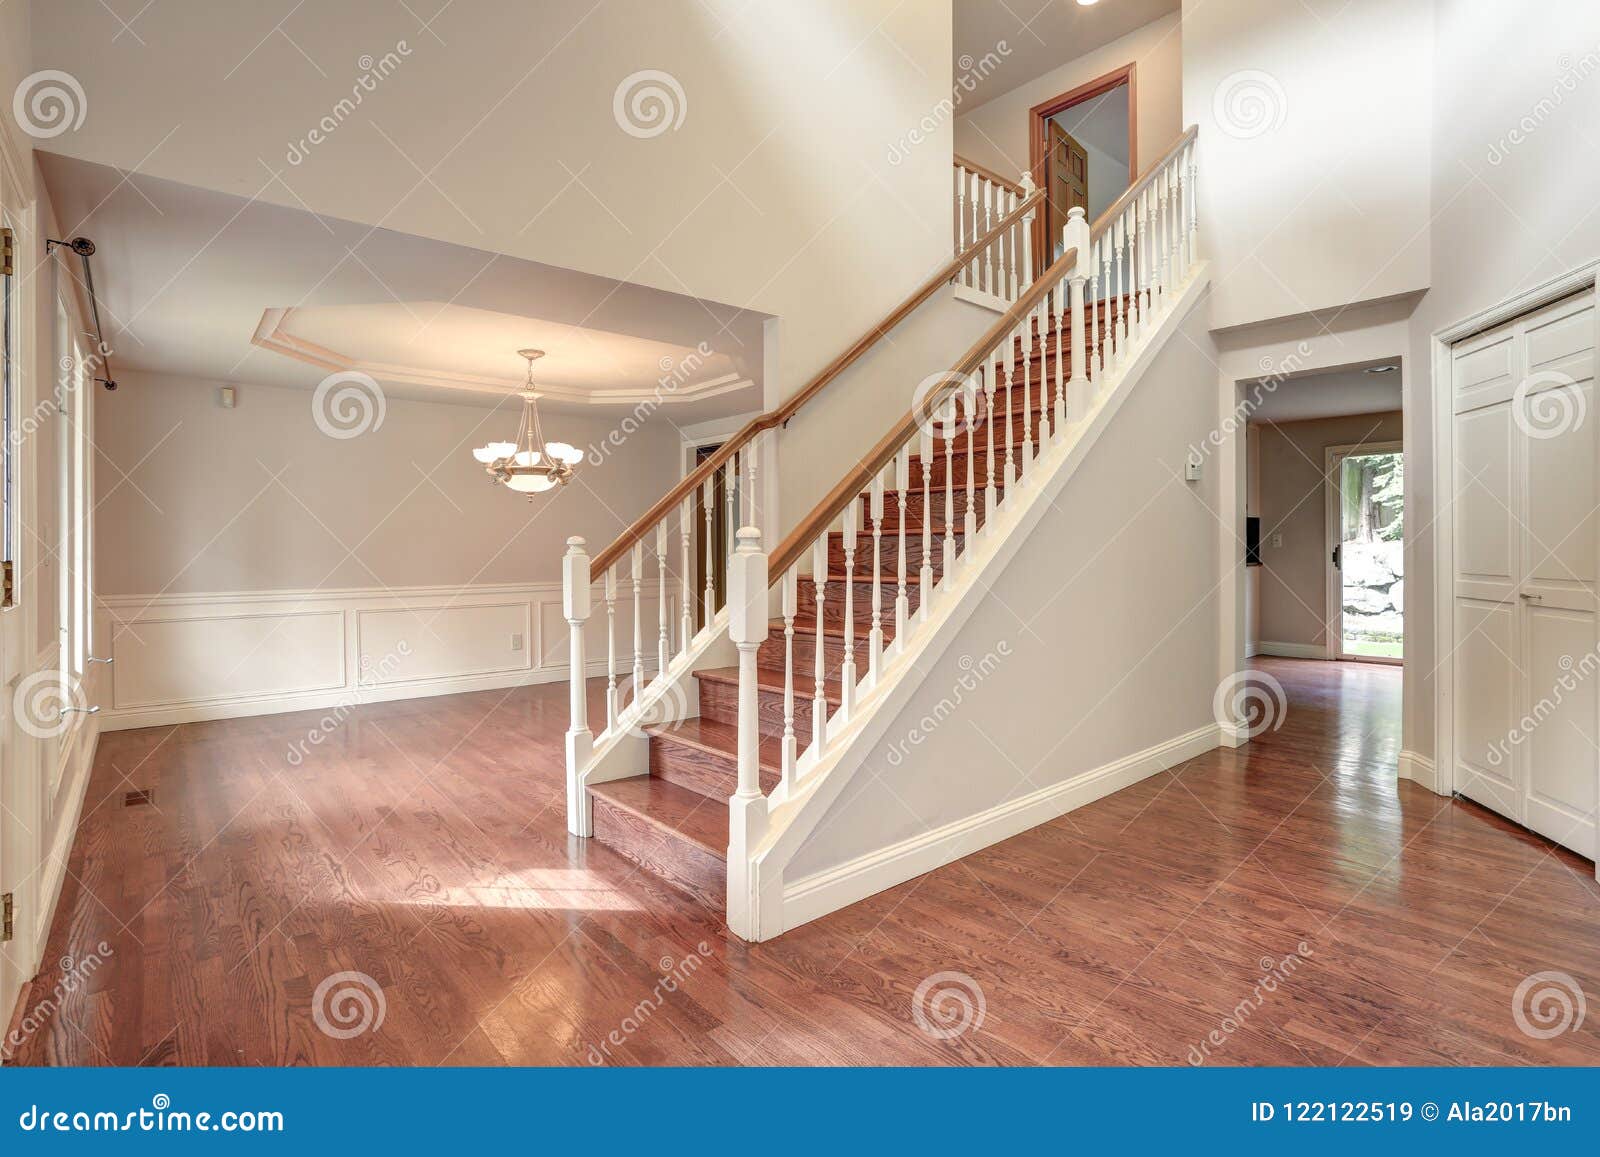 empty entrance room with staircase.